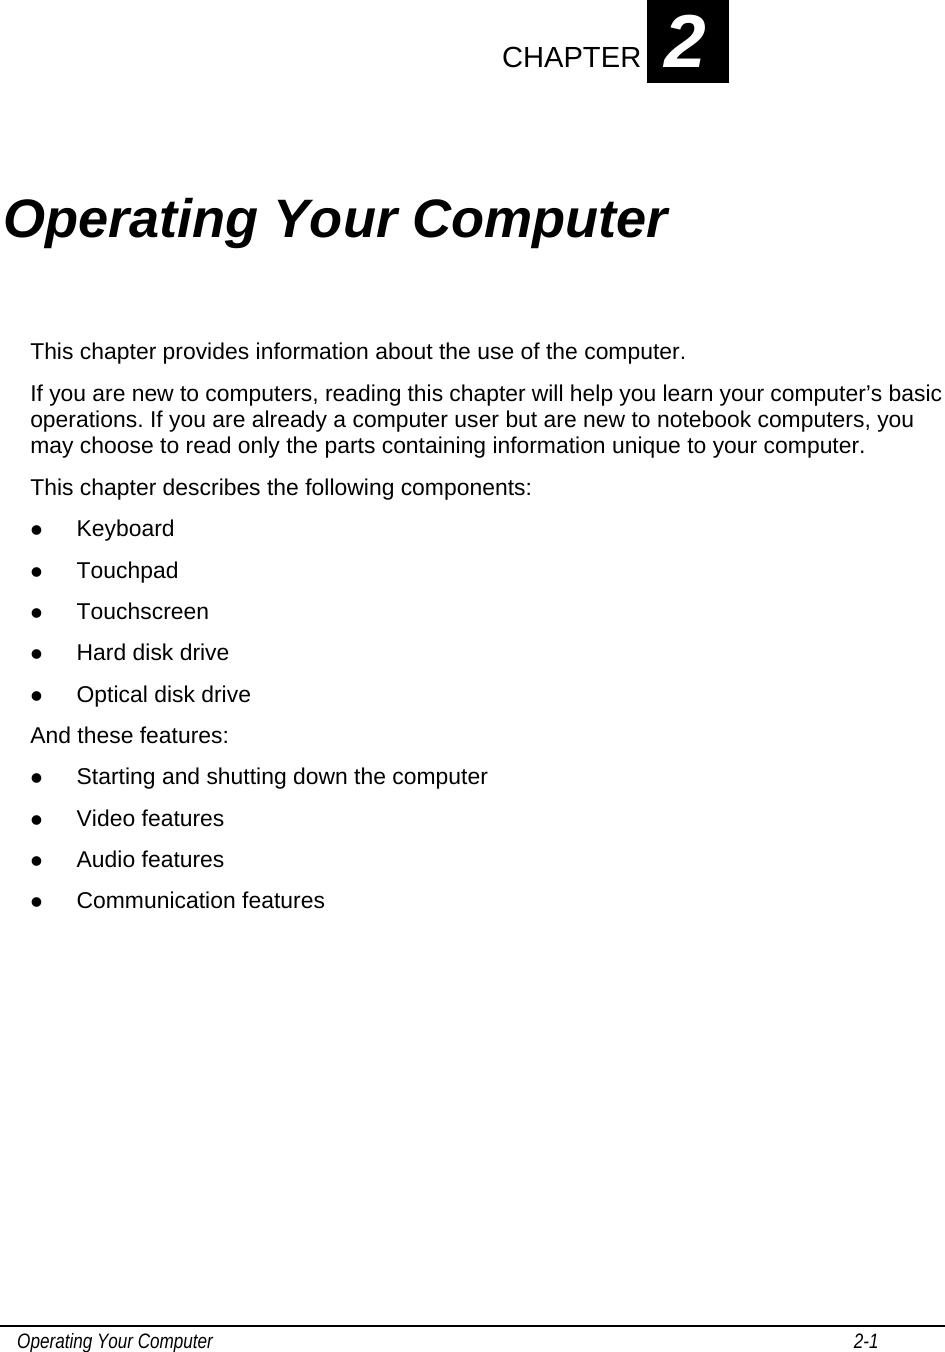    Operating Your Computer                                                                                                                                       2-1   CHAPTER 2 Operating Your Computer This chapter provides information about the use of the computer. If you are new to computers, reading this chapter will help you learn your computer’s basic operations. If you are already a computer user but are new to notebook computers, you may choose to read only the parts containing information unique to your computer. This chapter describes the following components: z Keyboard z Touchpad z Touchscreen z Hard disk drive z Optical disk drive And these features: z Starting and shutting down the computer z Video features z Audio features z Communication features        